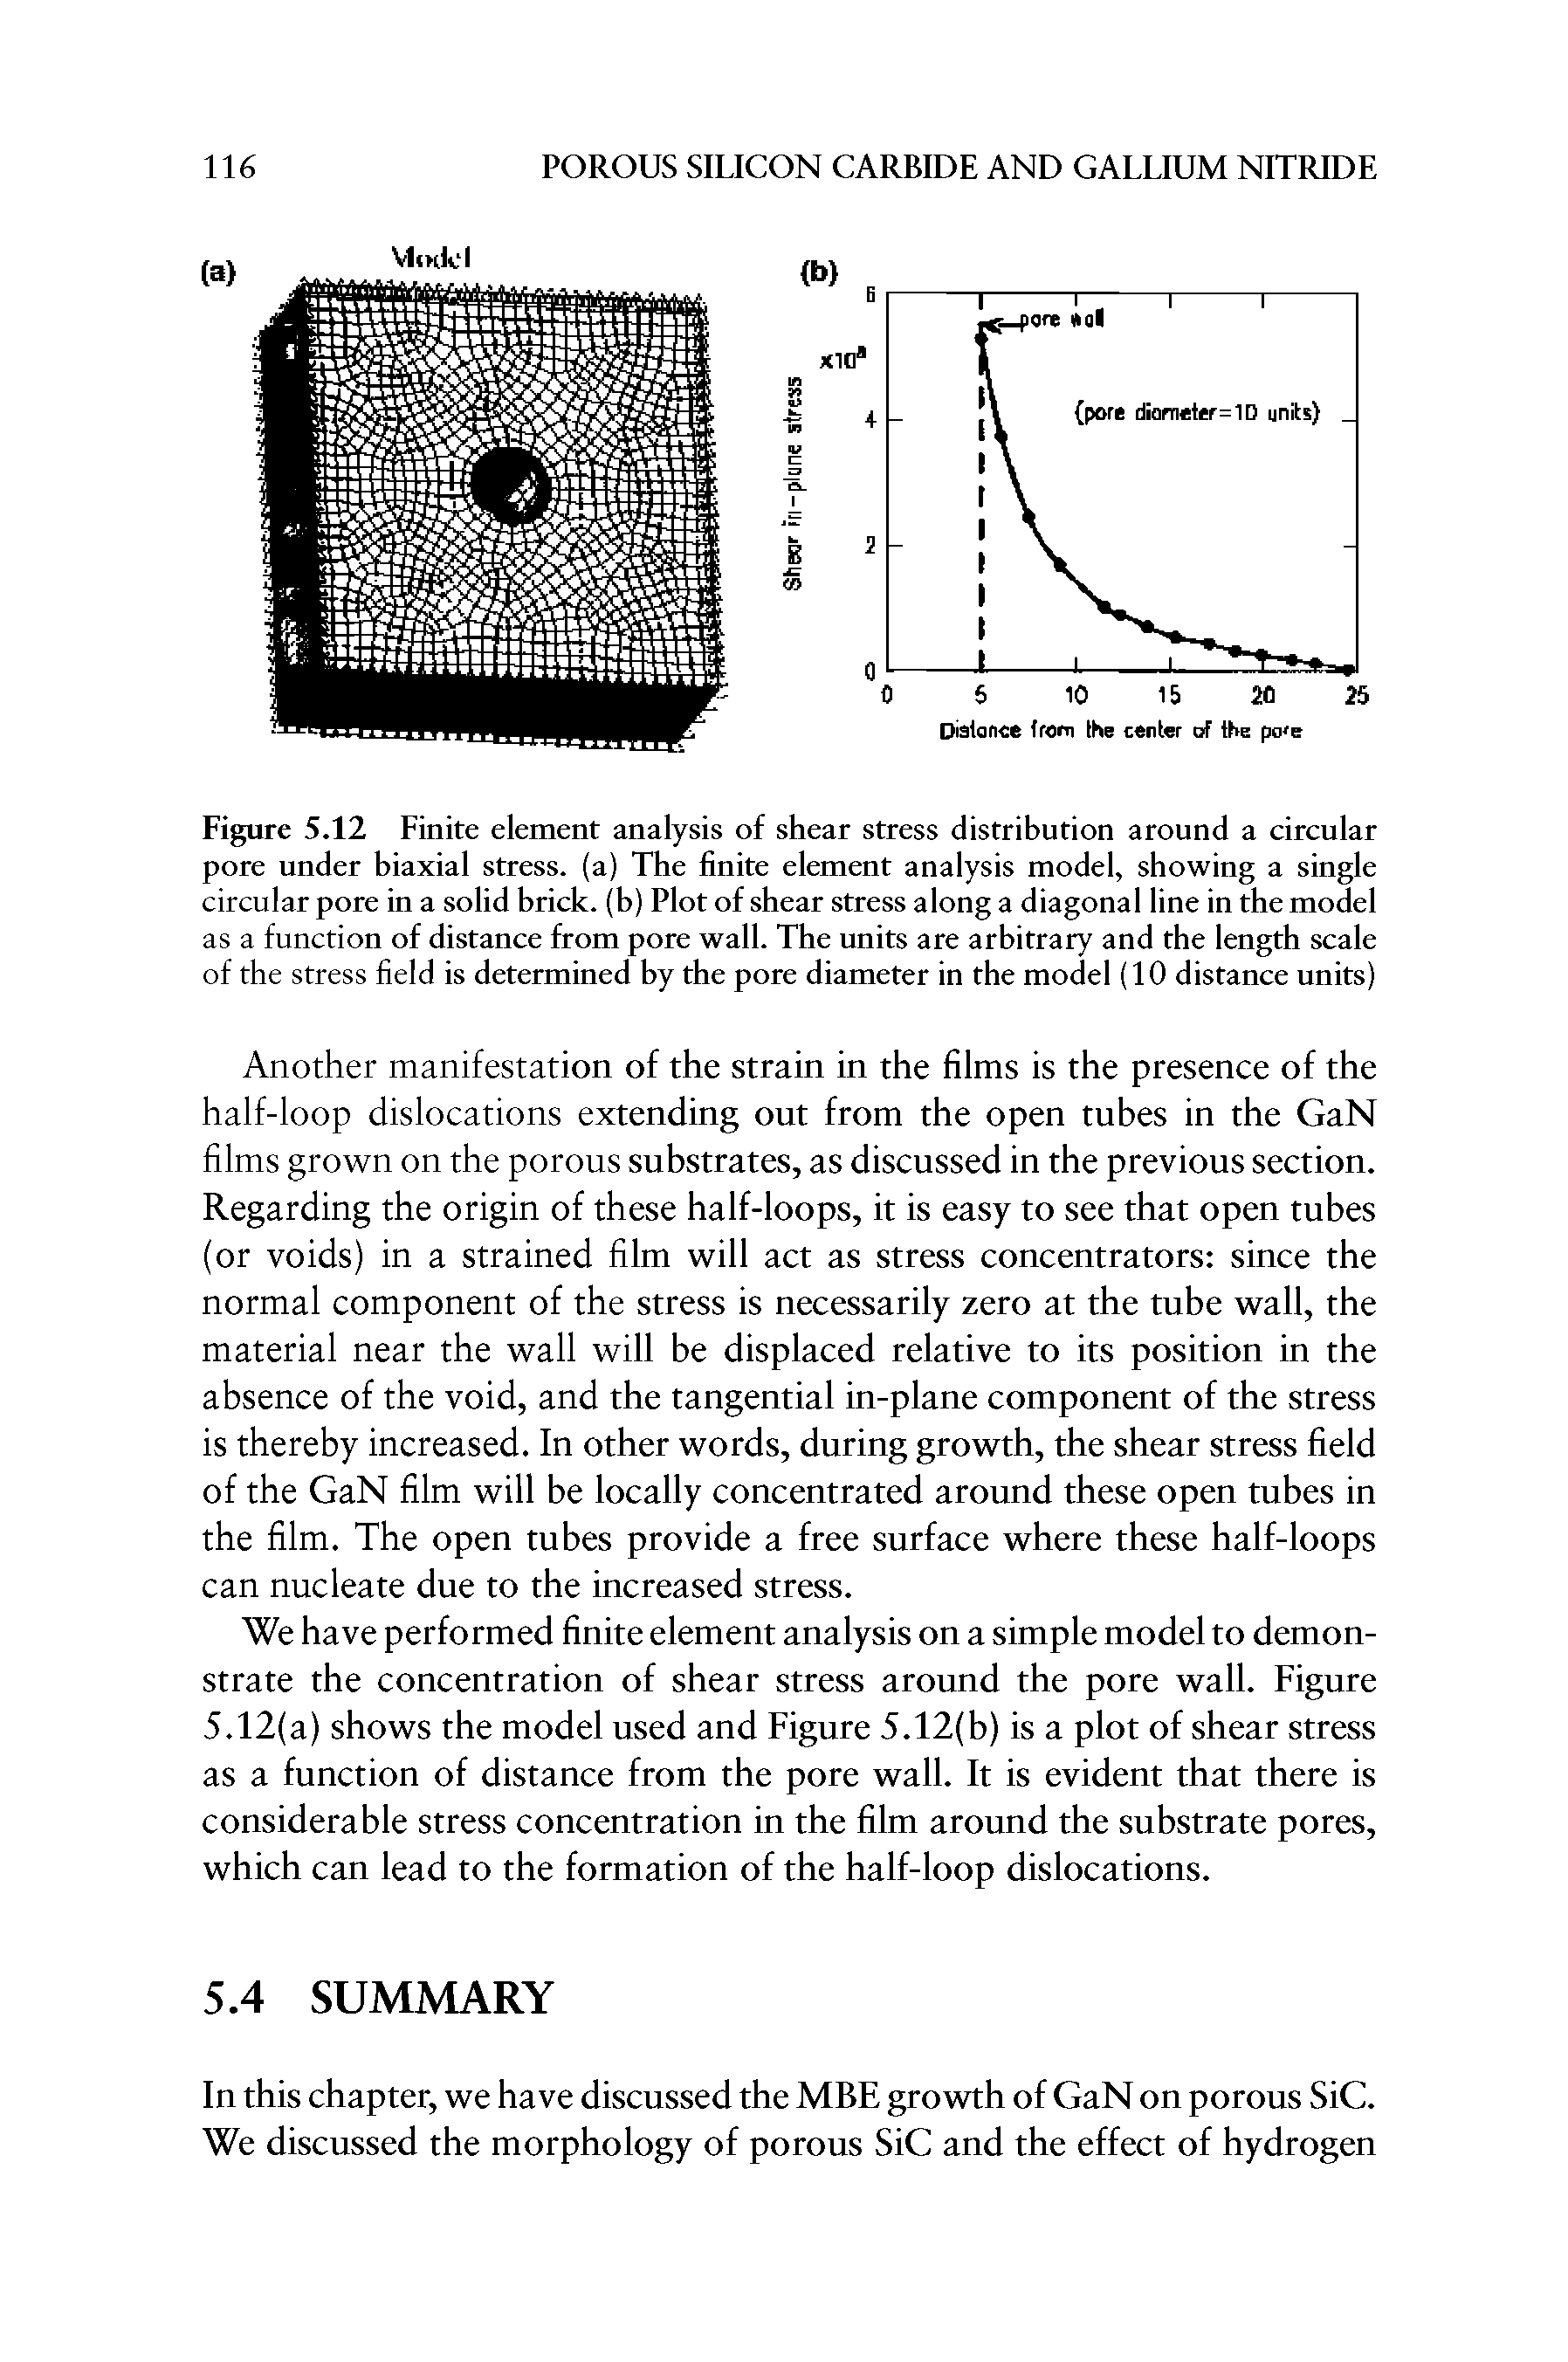 Figure 5.12 Finite element analysis of shear stress distribution around a circular pore under biaxial stress, (a) The finite element analysis model, showing a single circular pore in a solid brick, (b) Plot of shear stress along a diagonal line in the model as a function of distance from pore wall. The units are arbitrary and the length scale of the stress field is determined by the pore diameter in the model (10 distance units)...